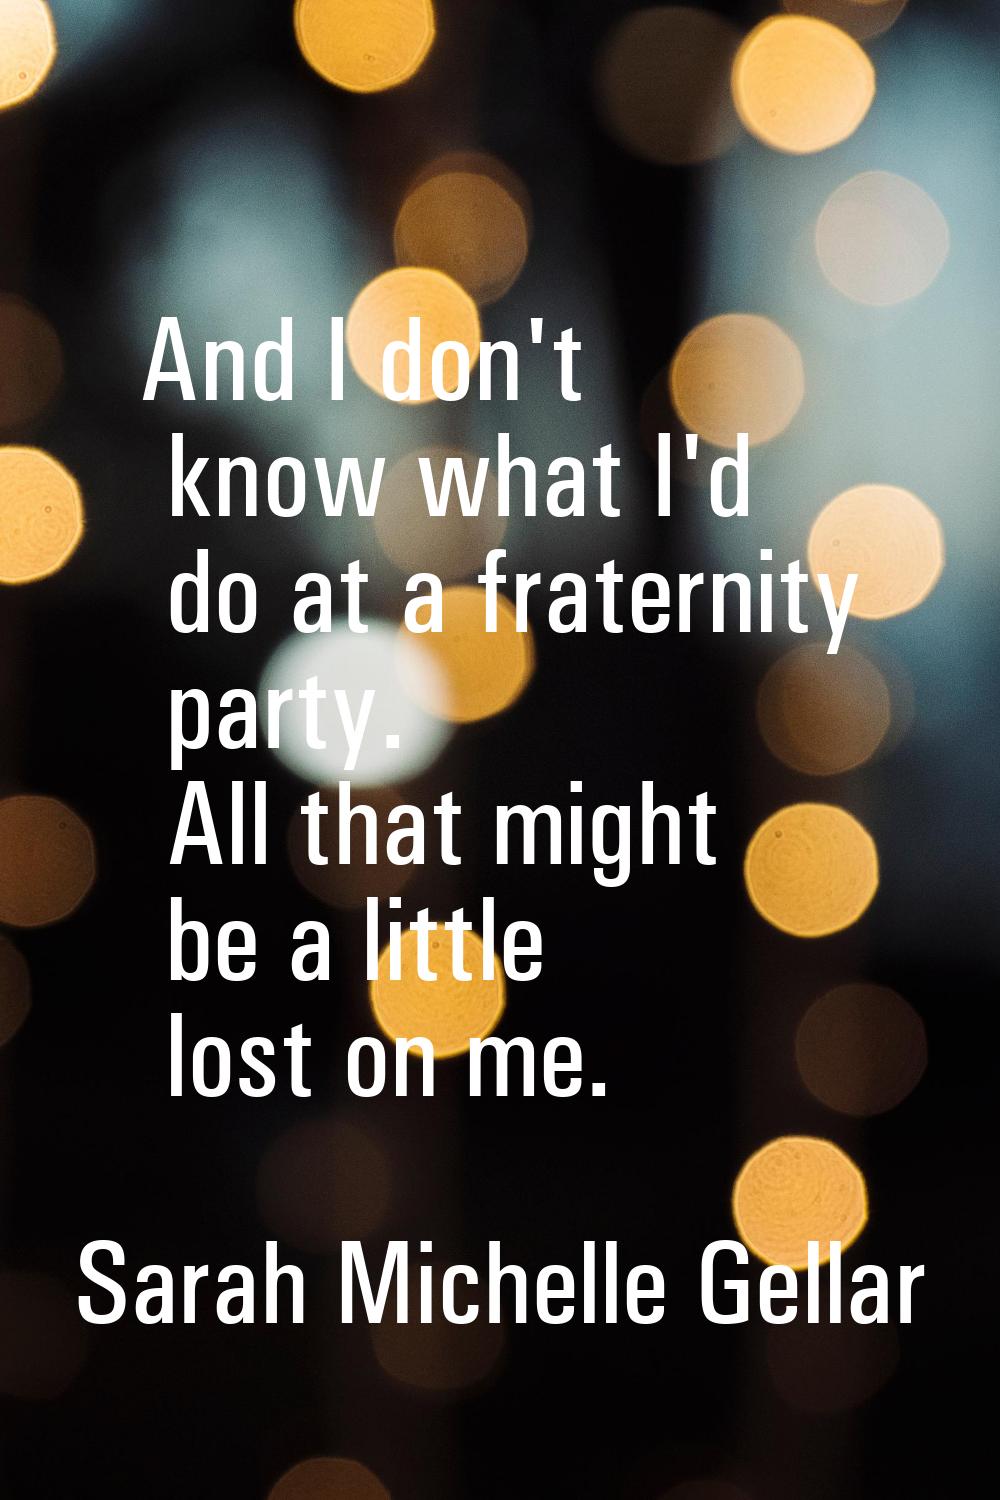 And I don't know what I'd do at a fraternity party. All that might be a little lost on me.